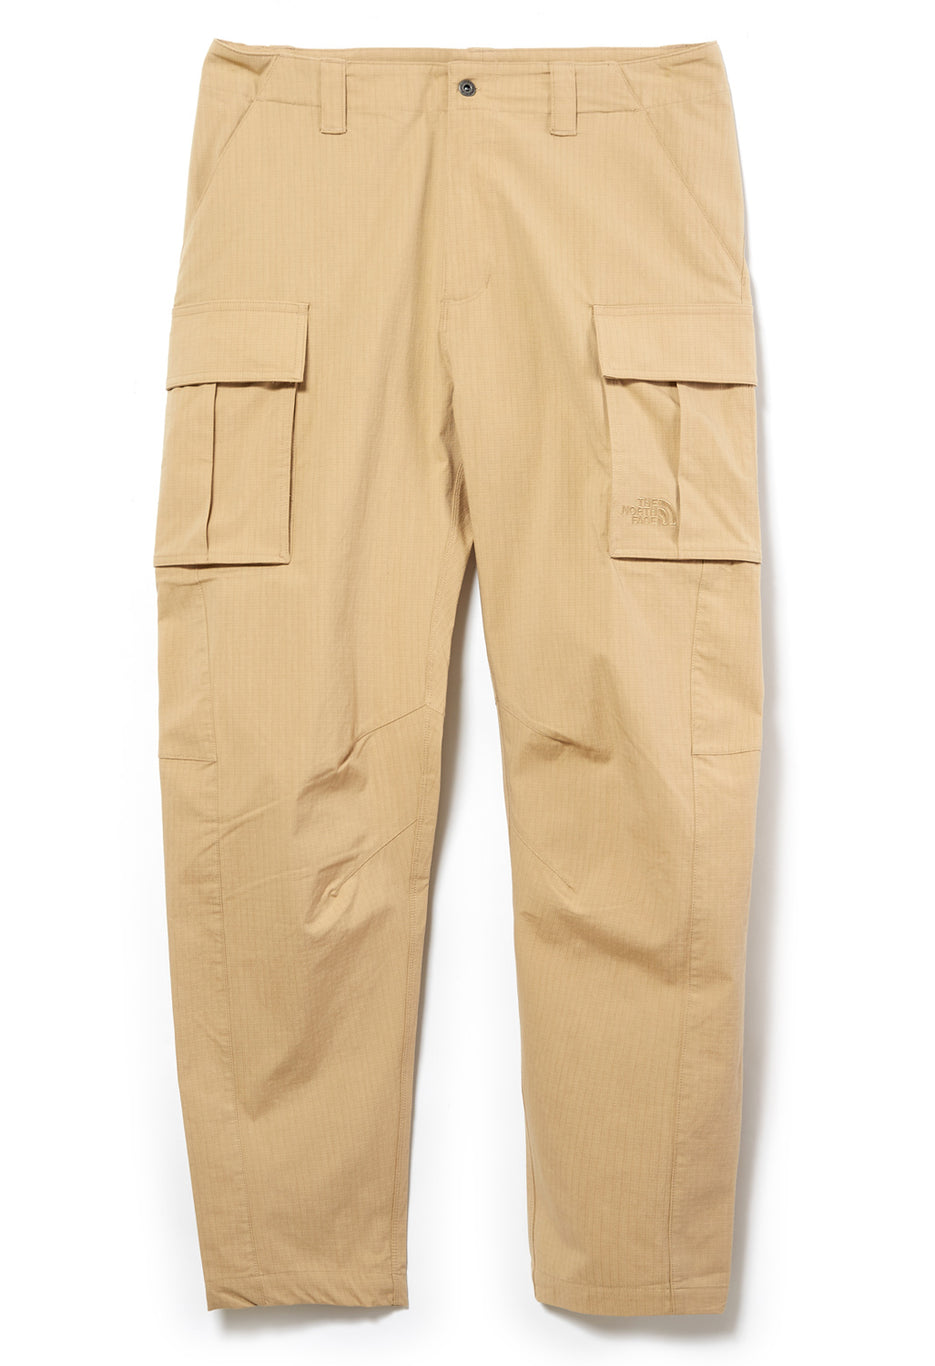 The North Face Men's Anticline Cargo Pants 0